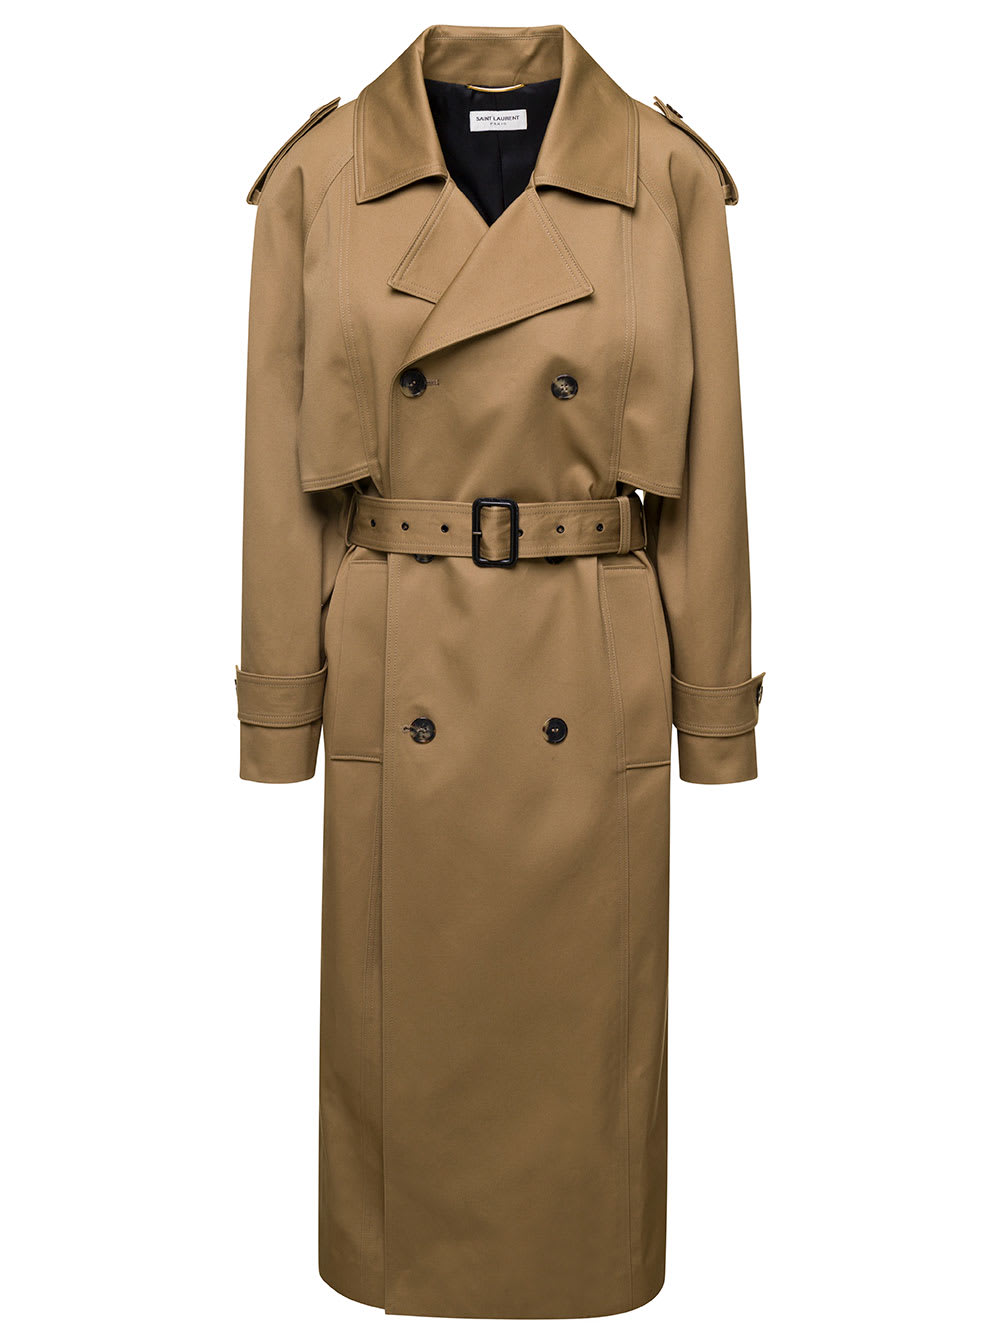 SAINT LAURENT BEIGE CLASSIC DOUBLE-BREASTED TRENCH COAT IN COTTON WOMAN